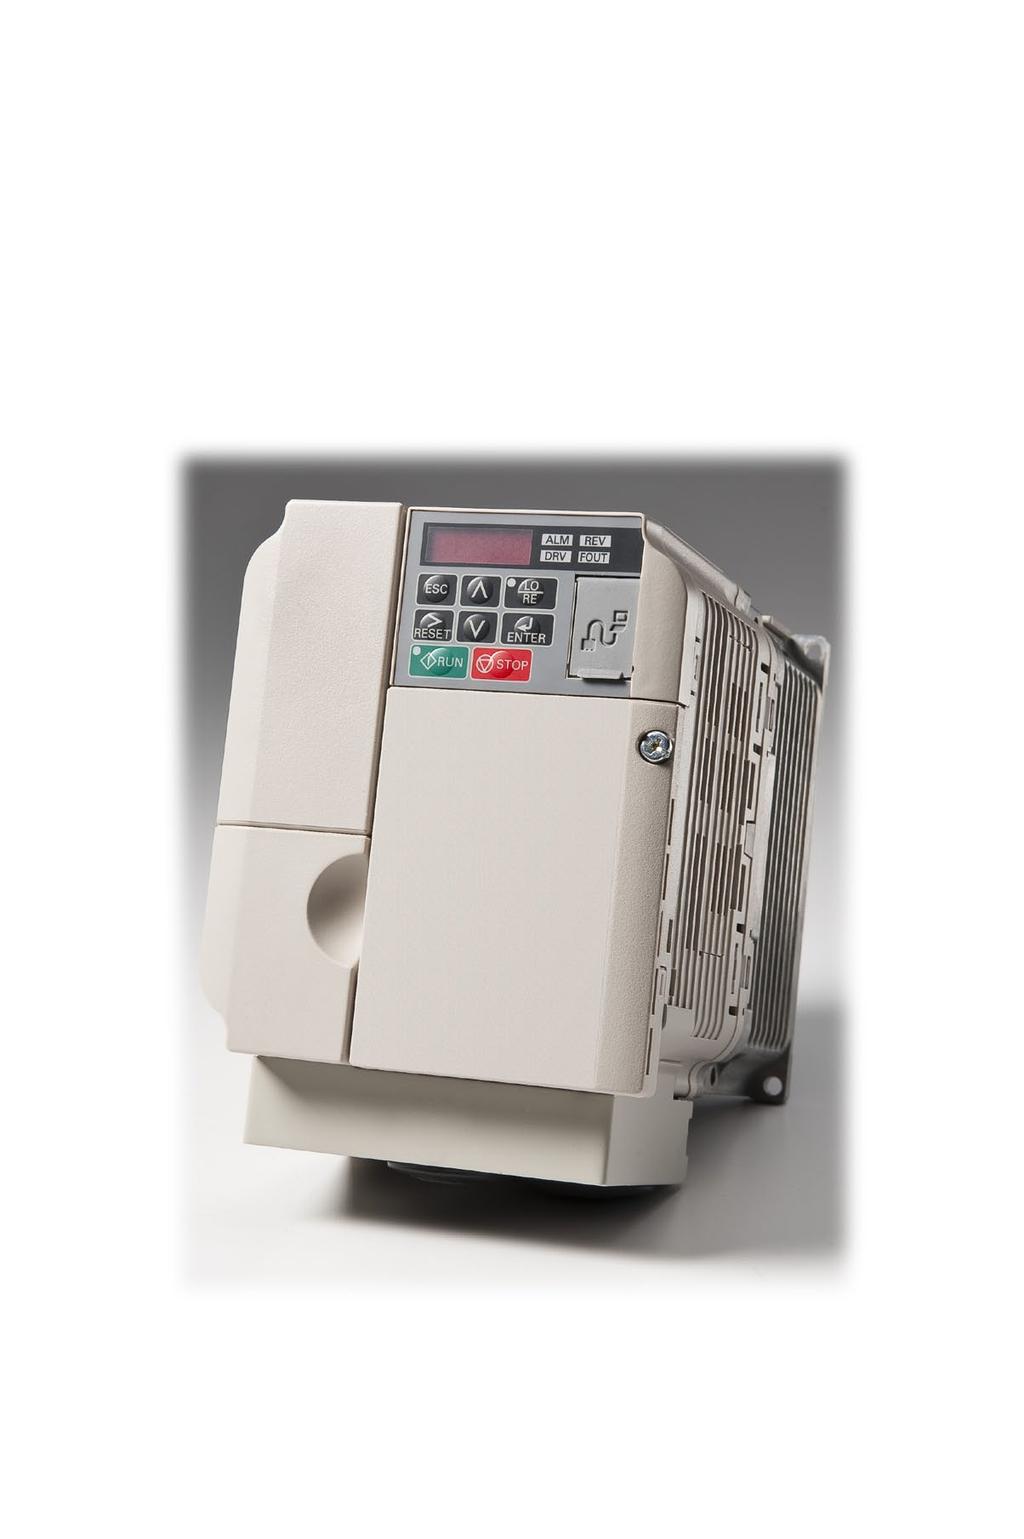 VFD (Variable Frequency Drive) Location & Function Testing VFD...B-19 VFD Error Codes.